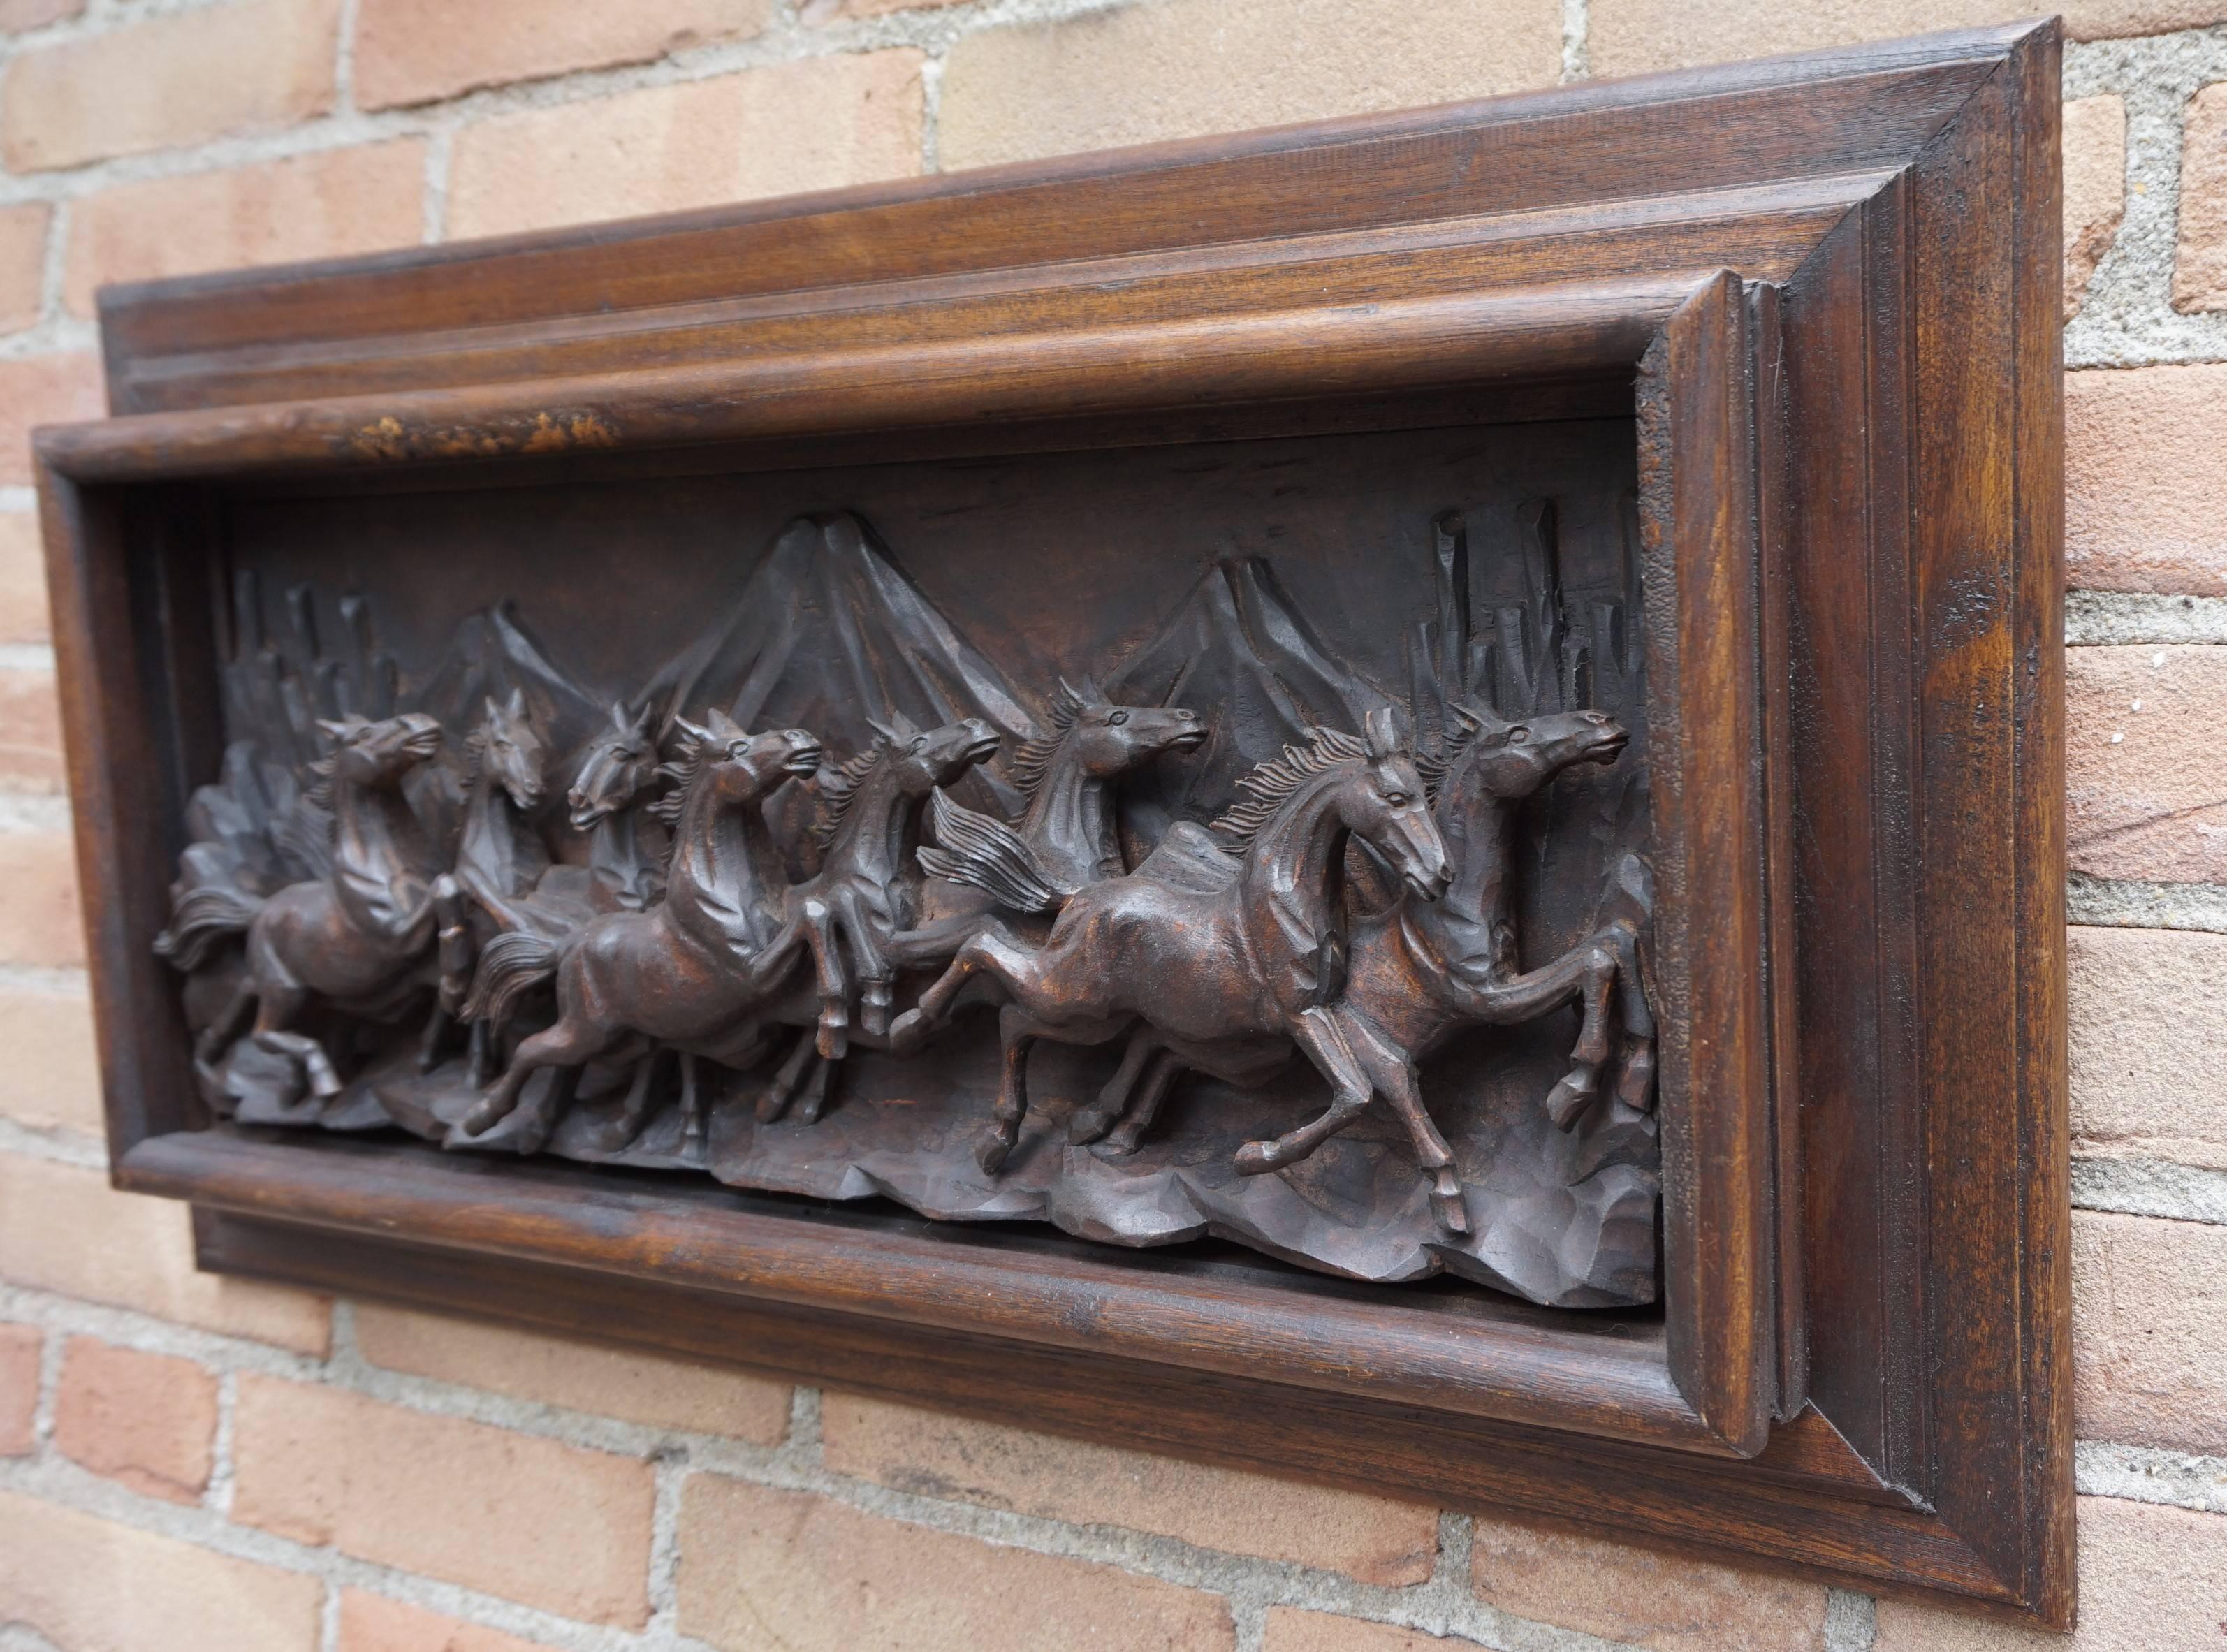 For the lovers of horses and horse related art.

This midcentury made wall plaque depicts a beautiful scene of eight galloping wild horses with a mountain range against the background. The relief is incredibly deep which creates an extra impressive